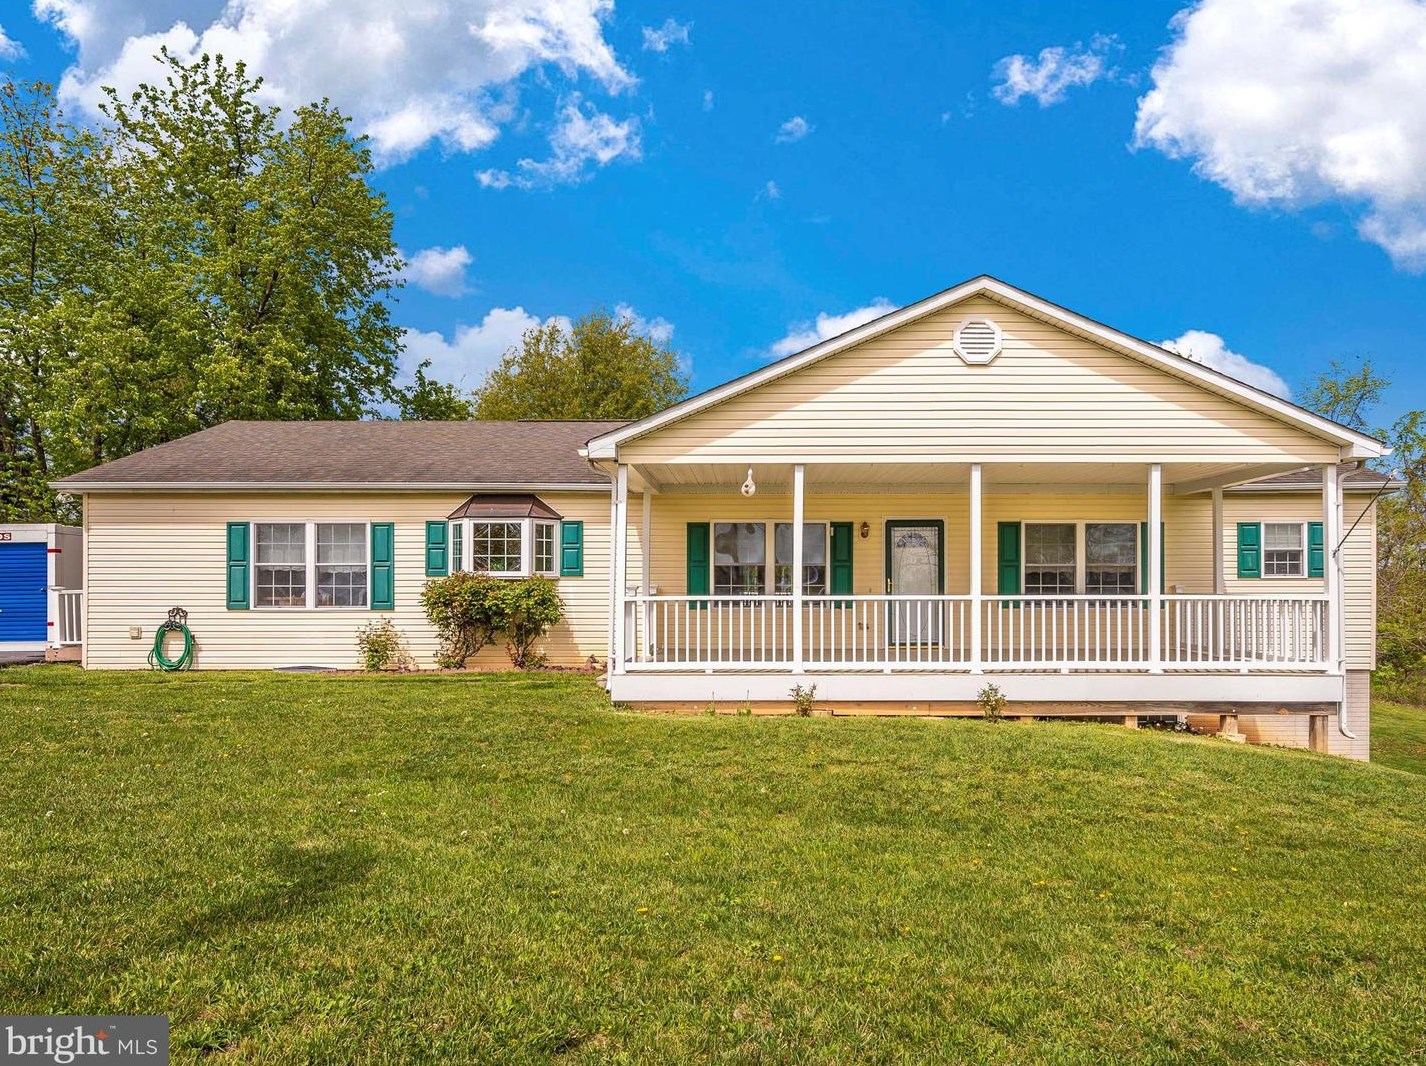 13910 Dry Run Rd, Clear Spring, MD 21722